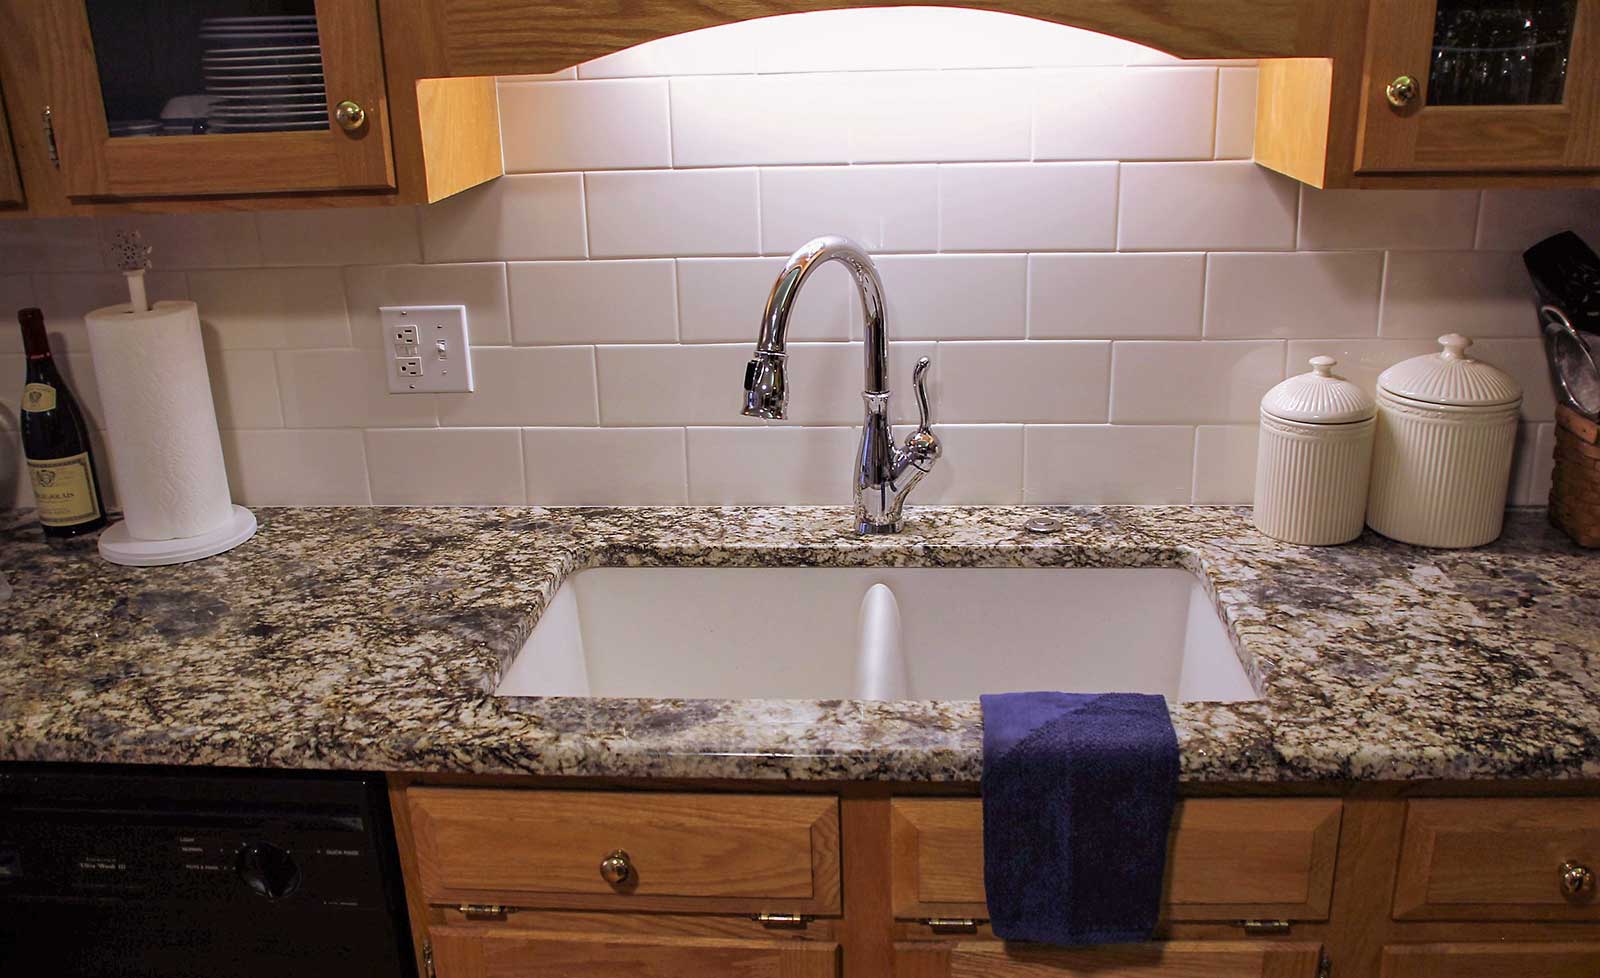 Close-up of granite countertop, subway tile backsplash, and under-counter double sink